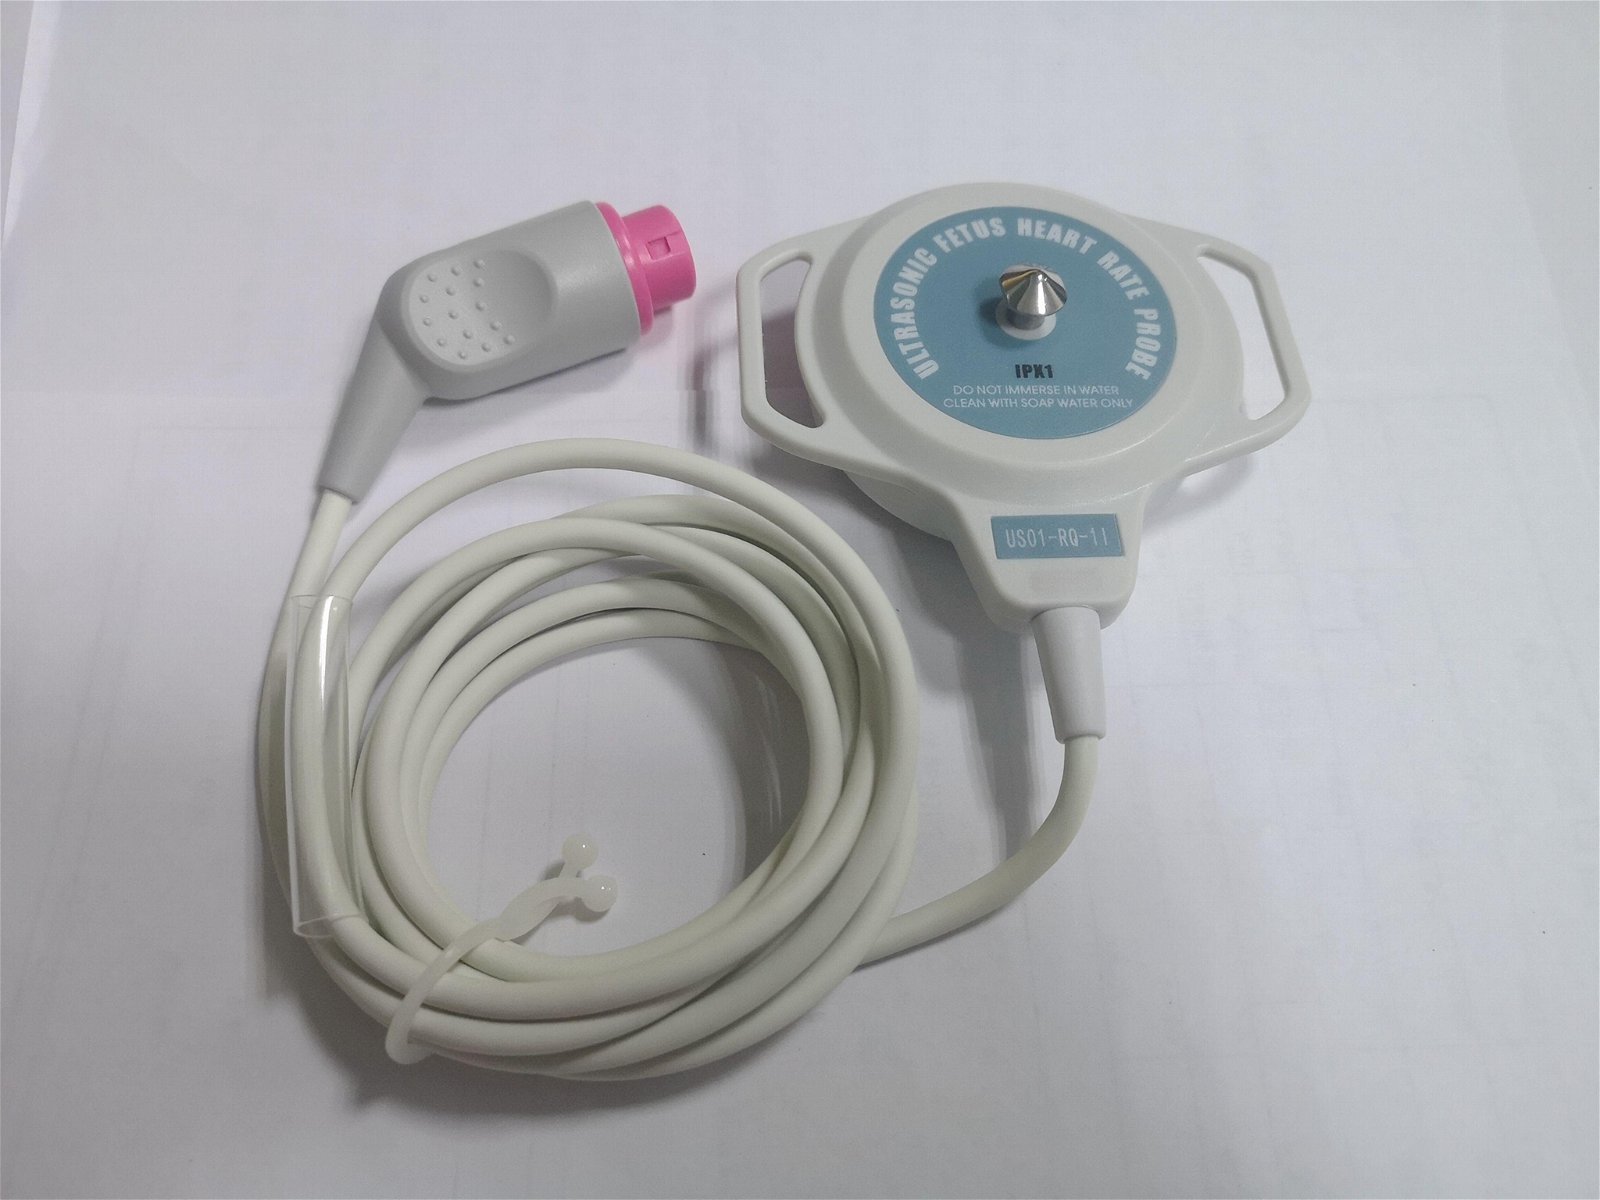 US fetal transducer/probe for Philips M1350 series 3